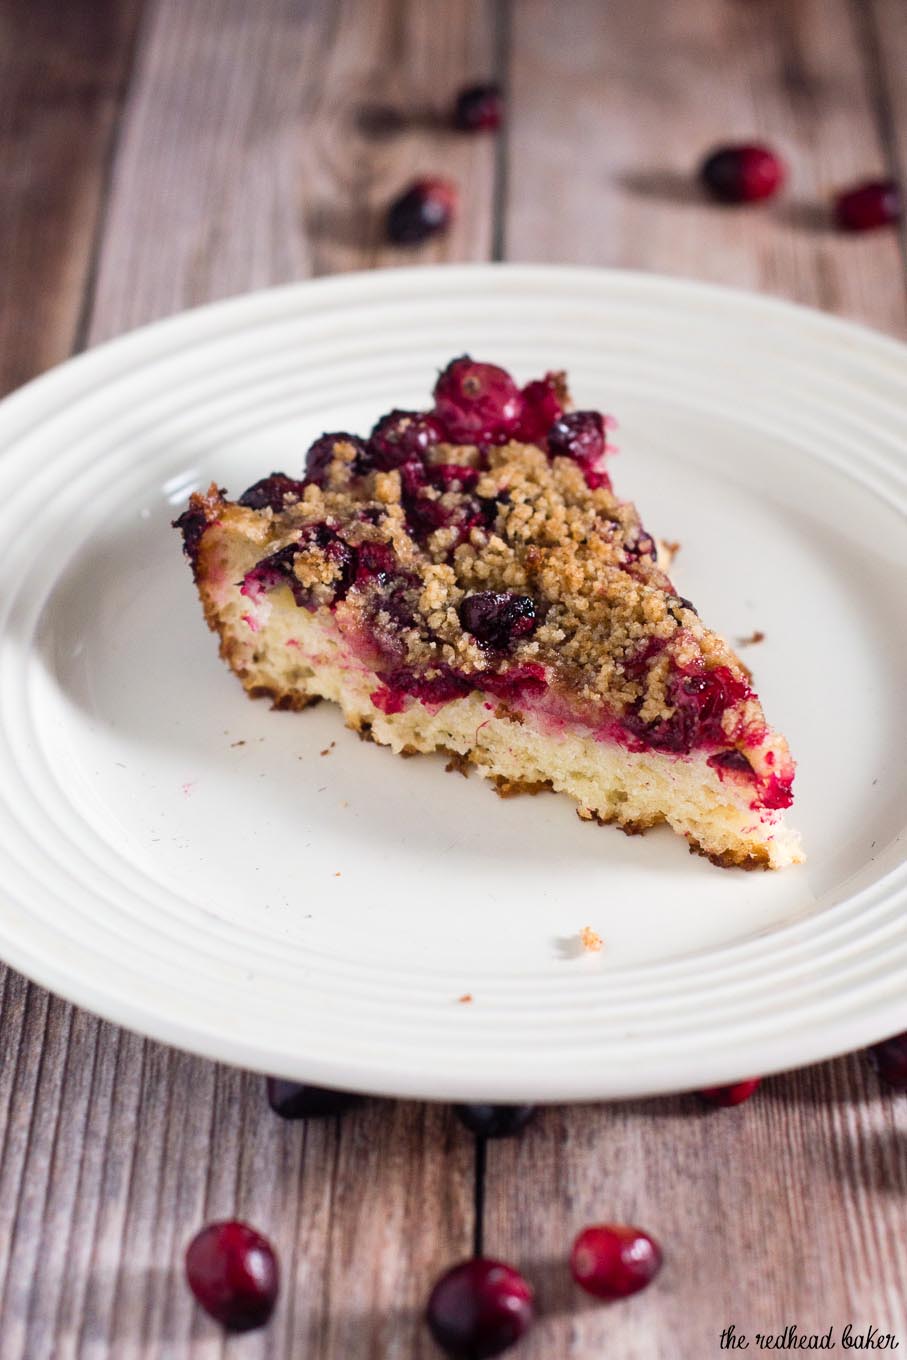 Cranberry crumb cake combines an orange-flavored cake, sugared cranberries and crumb topping for a delicious holiday breakfast or dessert.